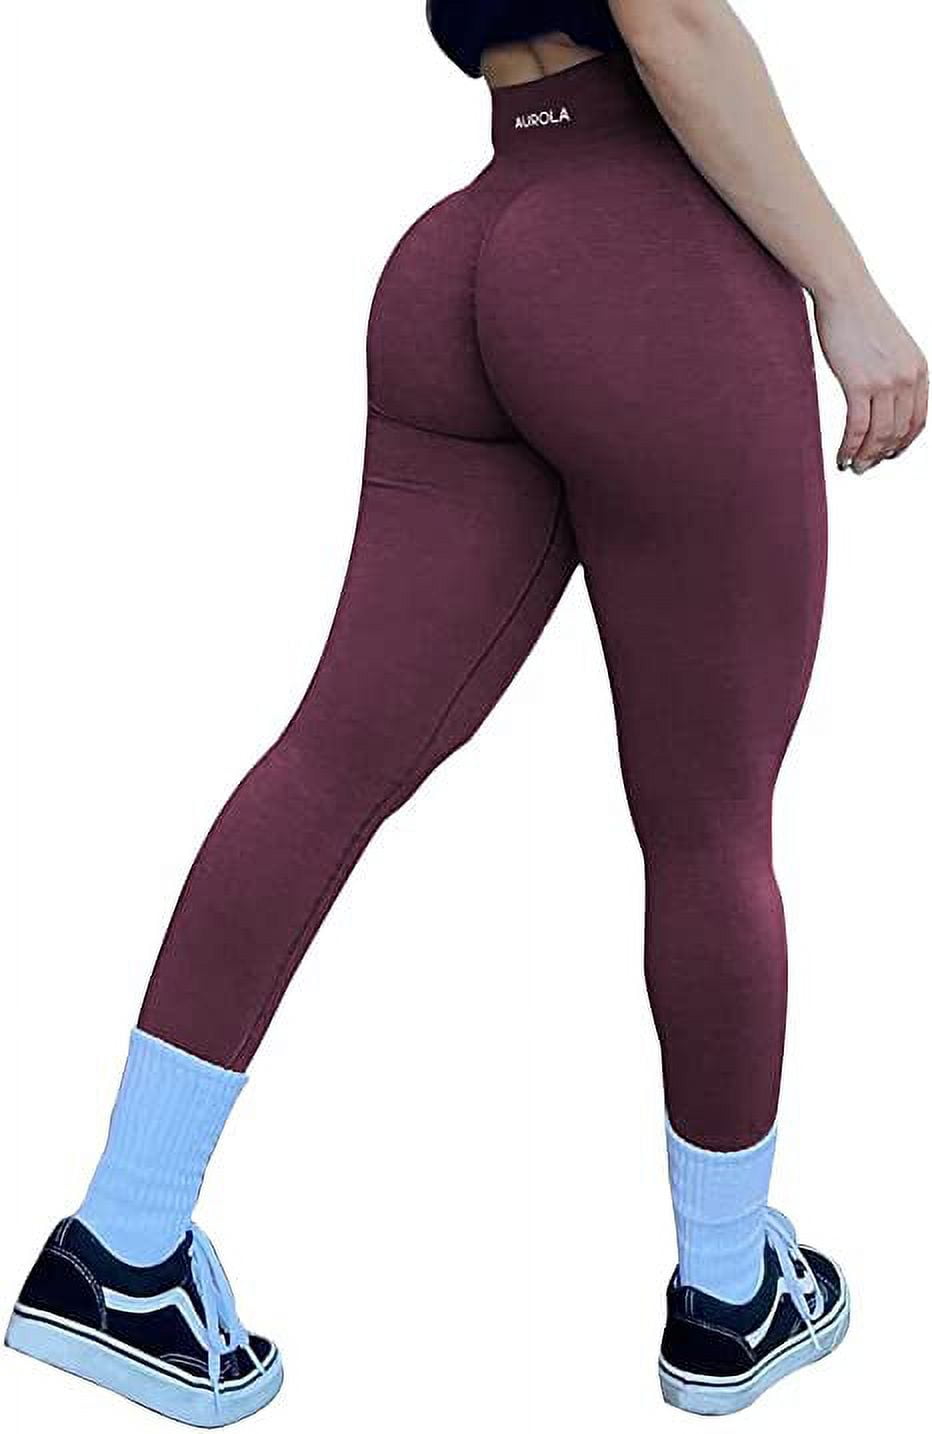 Yoga Pants Gym Shark High-waist Stretch Running Fitness Yoga Pants Workout licras  deportiva de mujer Sports wear for Women Gym price in UAE,  UAE